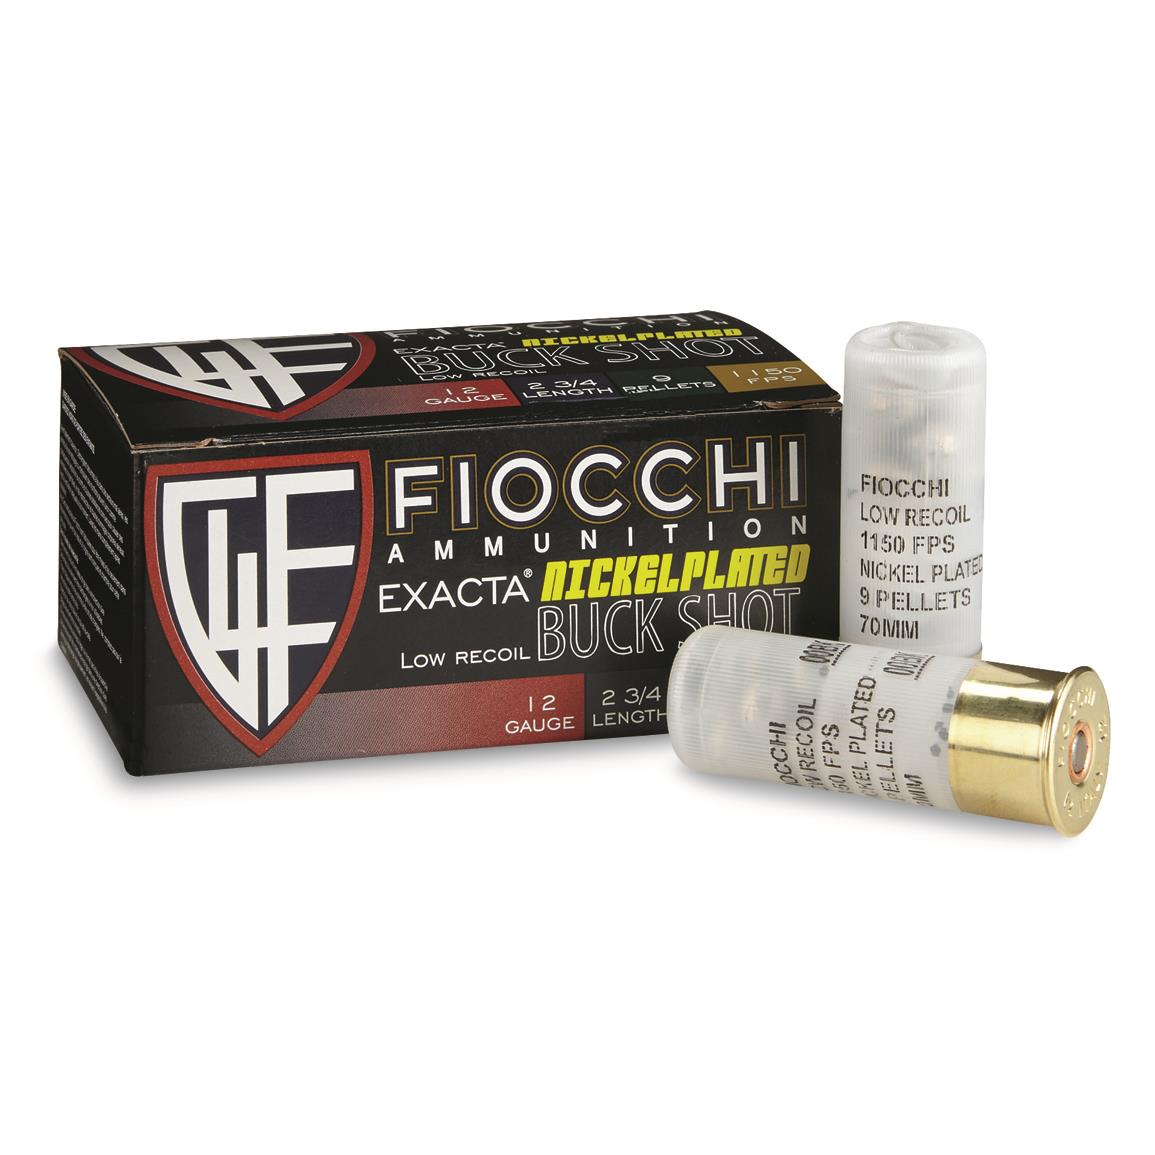 fiocchi-nickel-plated-12-gauge-2-3-4-9-pellet-low-recoil-no-00